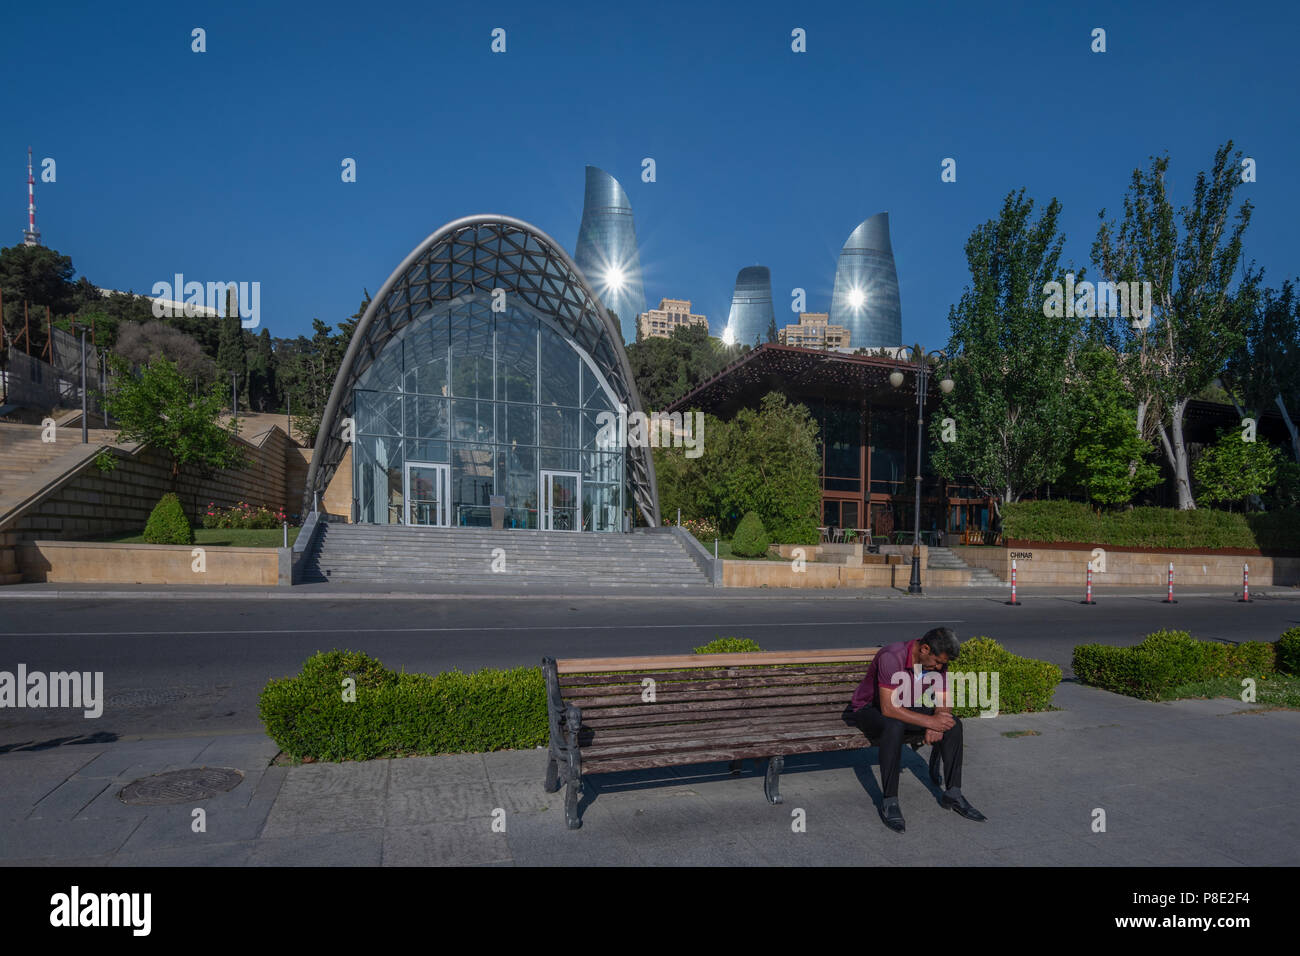 Entrance to Baku Funicular and  the Flame Towers in the backgound in Baku,Azerbaijan Stock Photo